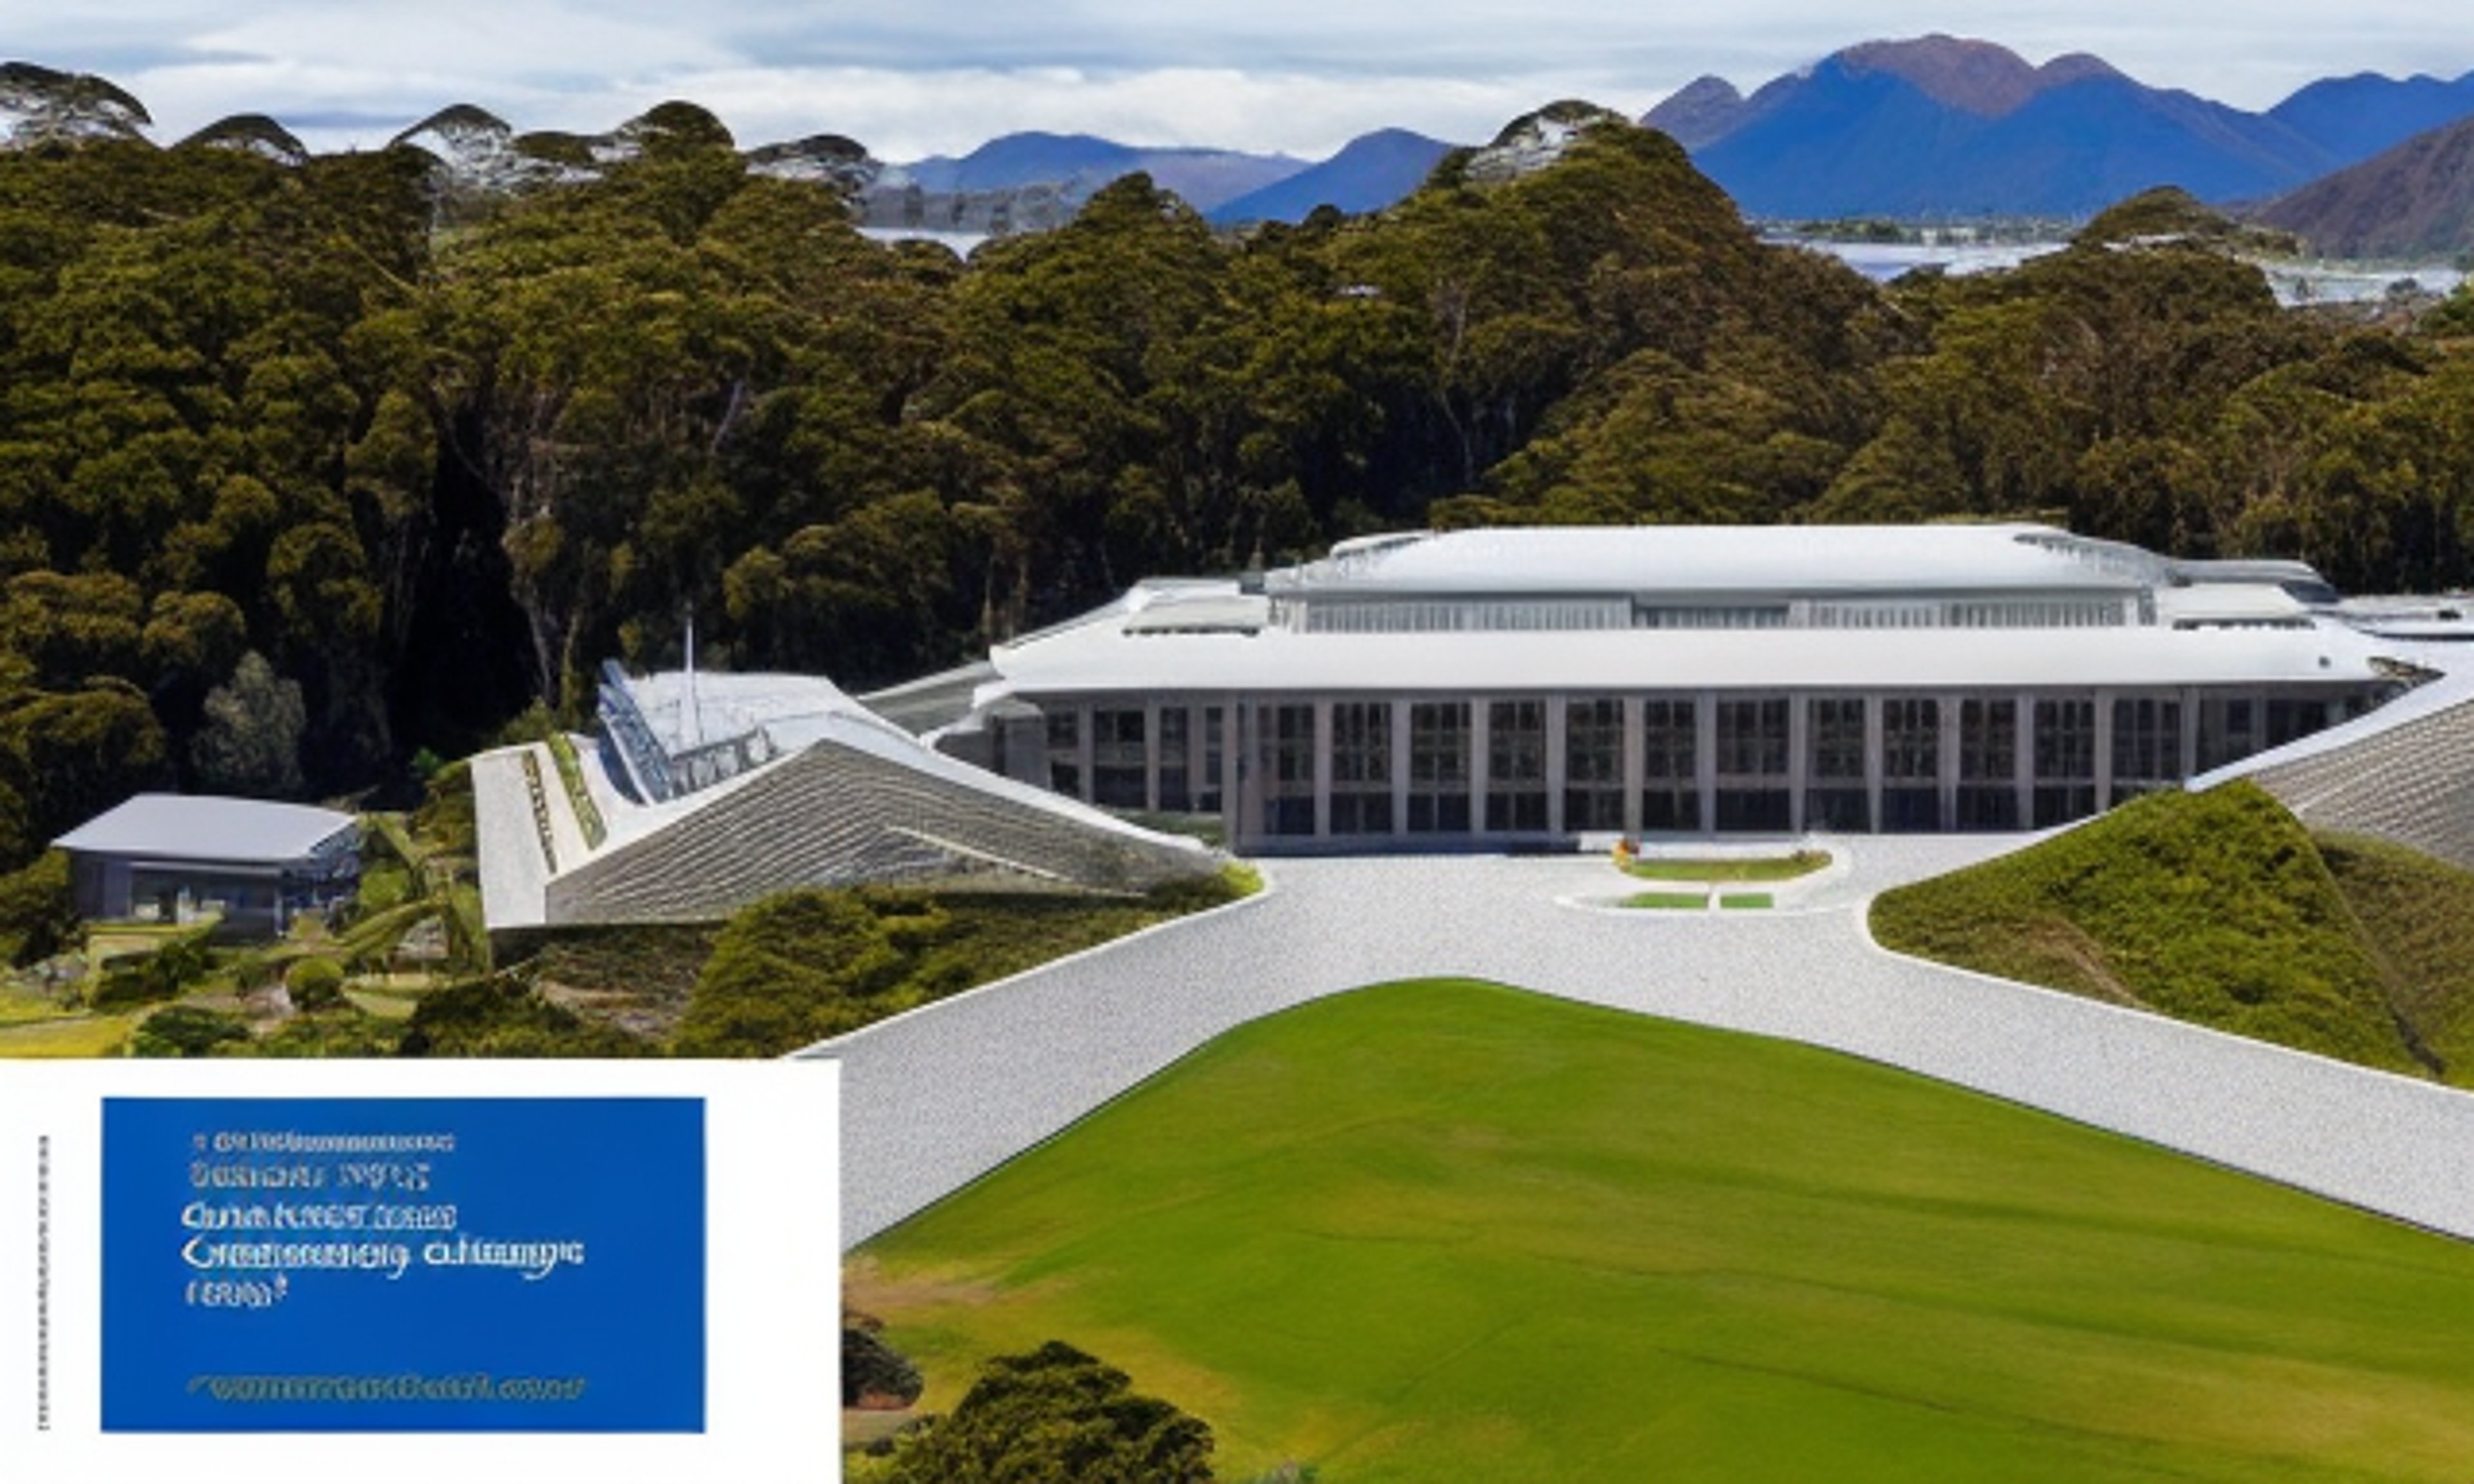 New Zealand Government Announces Annual Budget Focusing on Education, Healthcare, and Green Initiatives